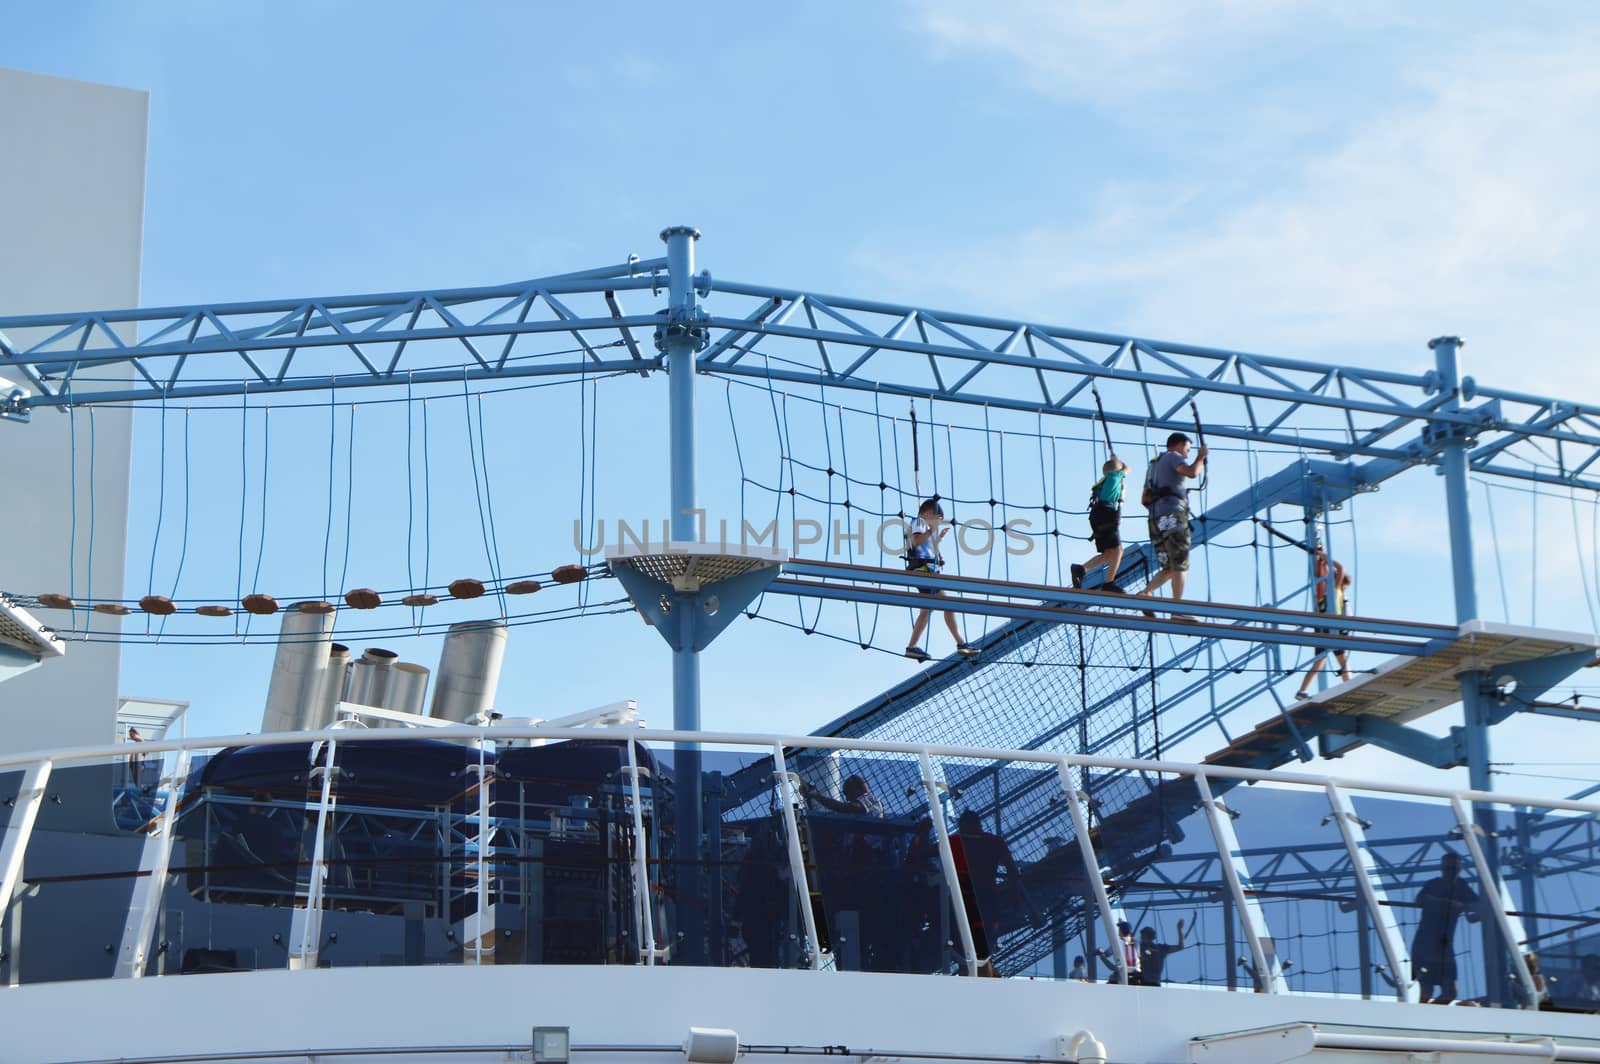 Rope amusement Park on the upper deck of the cruise liner MSC Meraviglia, October 09, 2018.